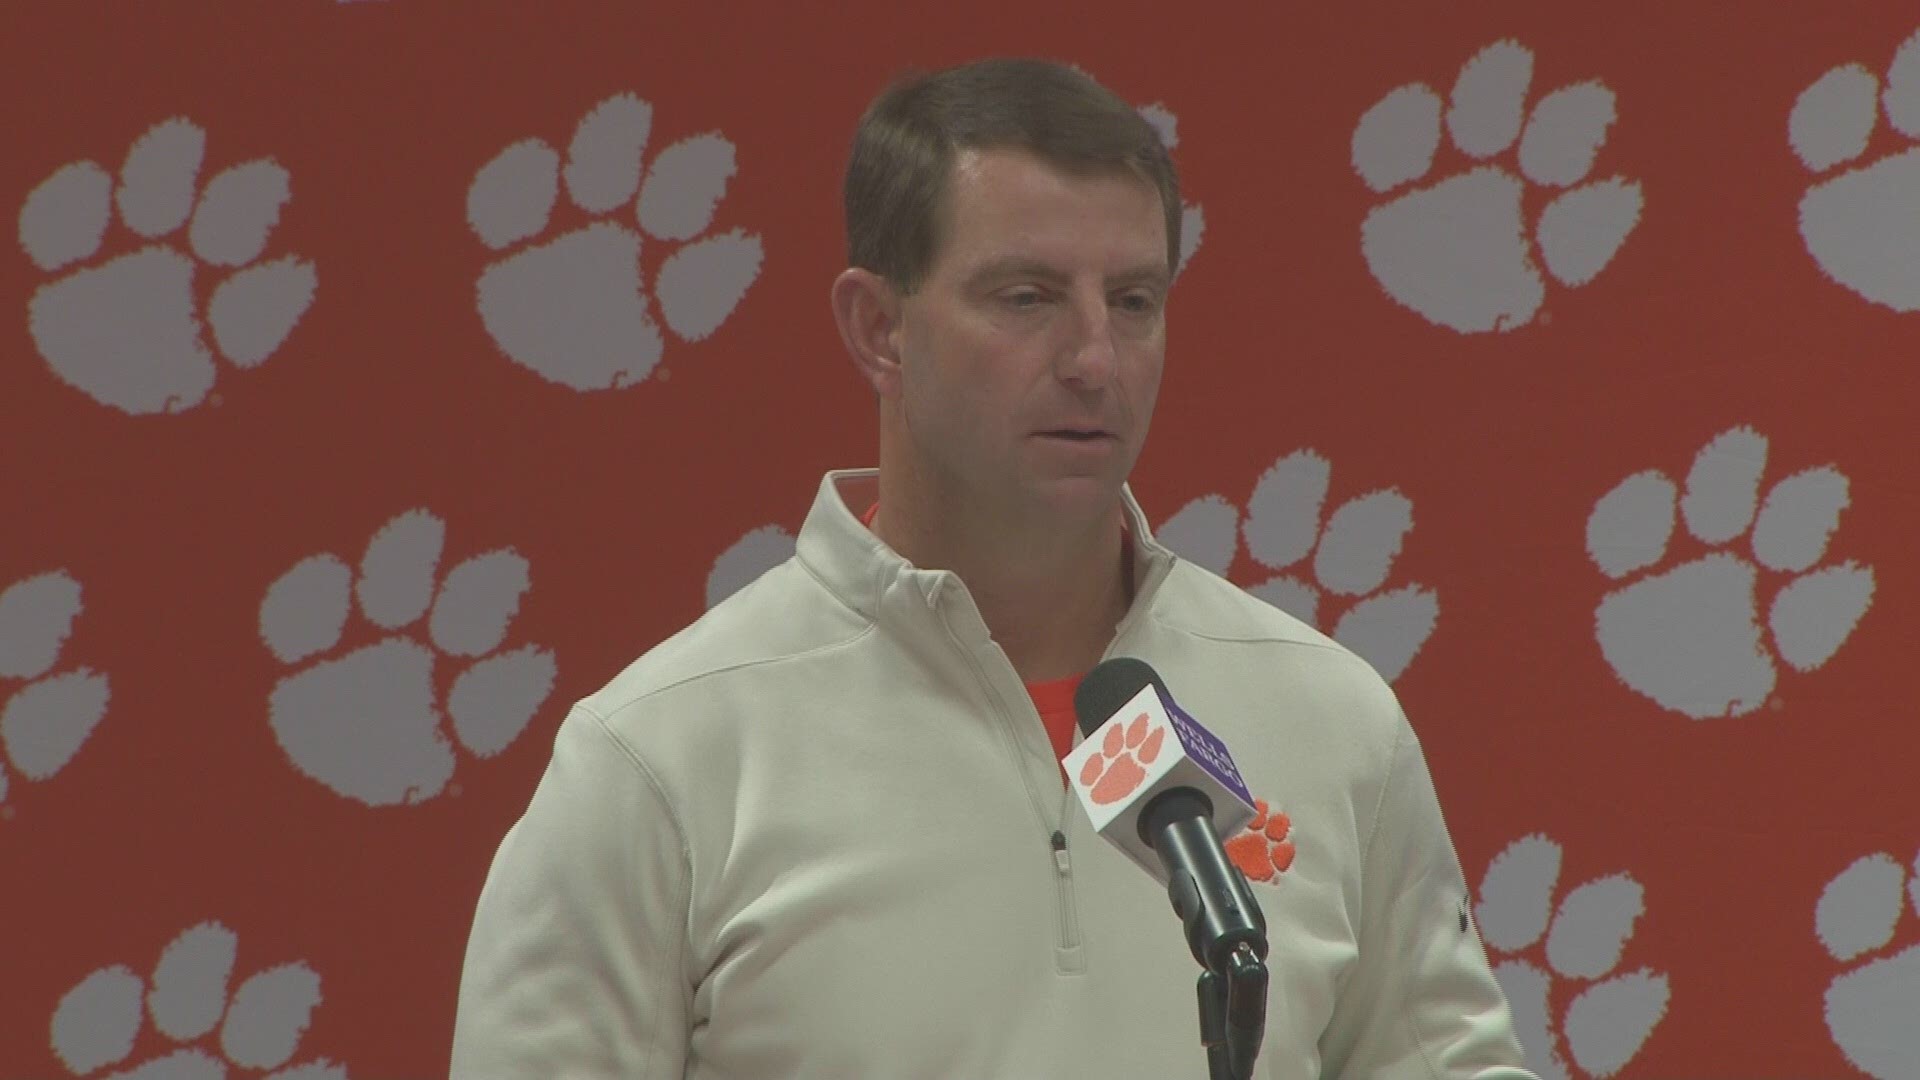 At his news conference to preview the Virginia game, Dabo Swinney left no doubt as to how he feels about Finebaum and others in the pundit class.